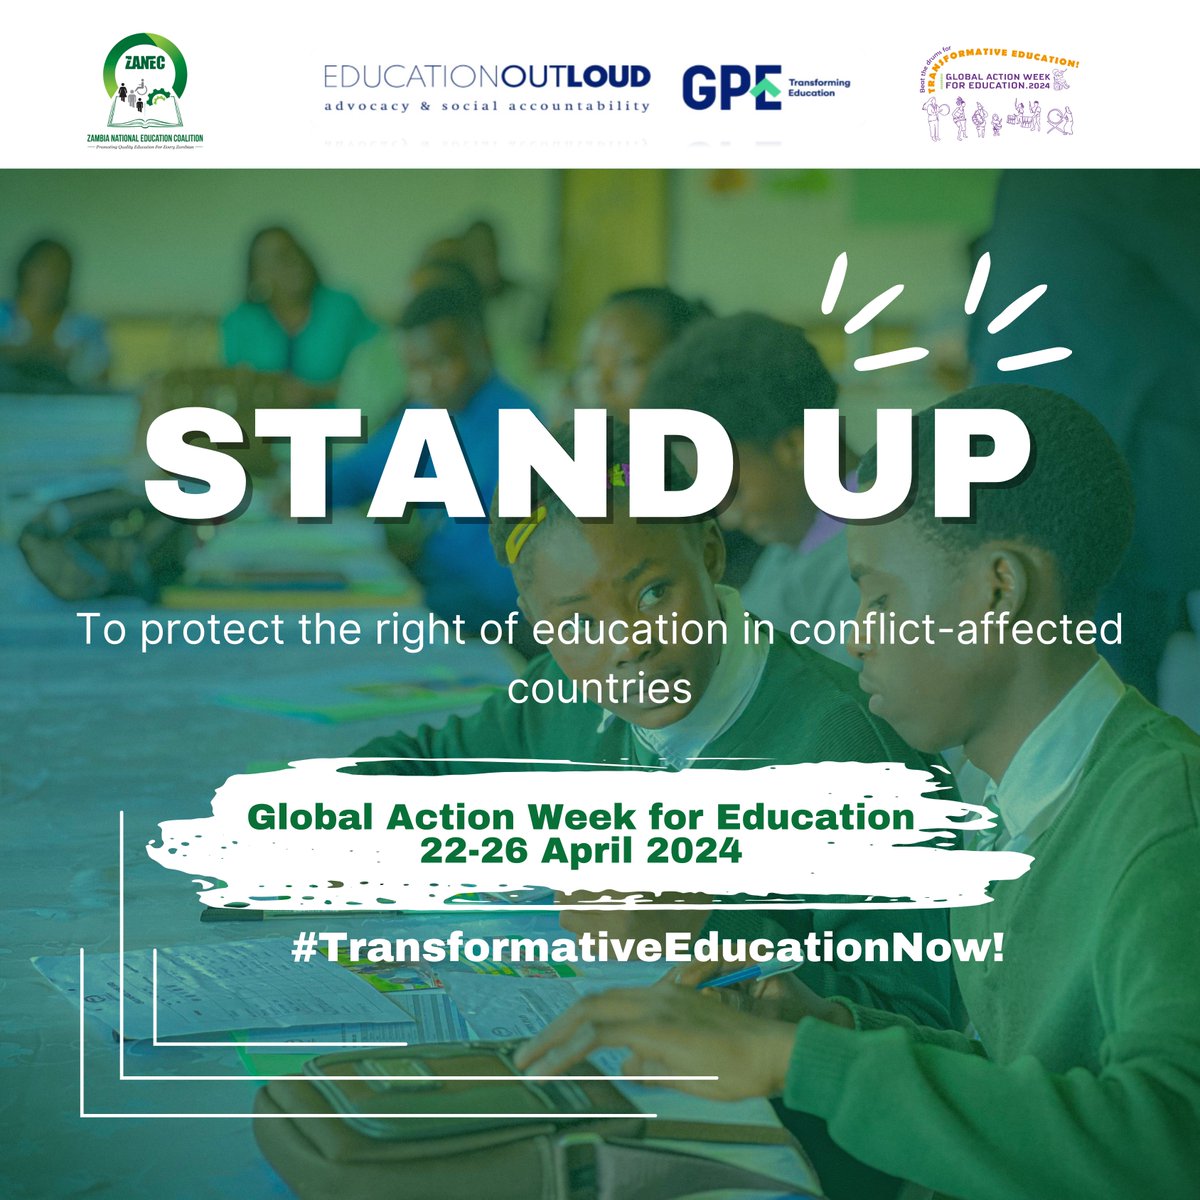 Transformative education drives social justice, peace, gender equality and sustainable development. This GAWE 2024, stand up for the protection of the right to education in conflict-affected countries. #TransformativeEducationNow #EducationForAll #NoOneLeftBehind #GAWE2024